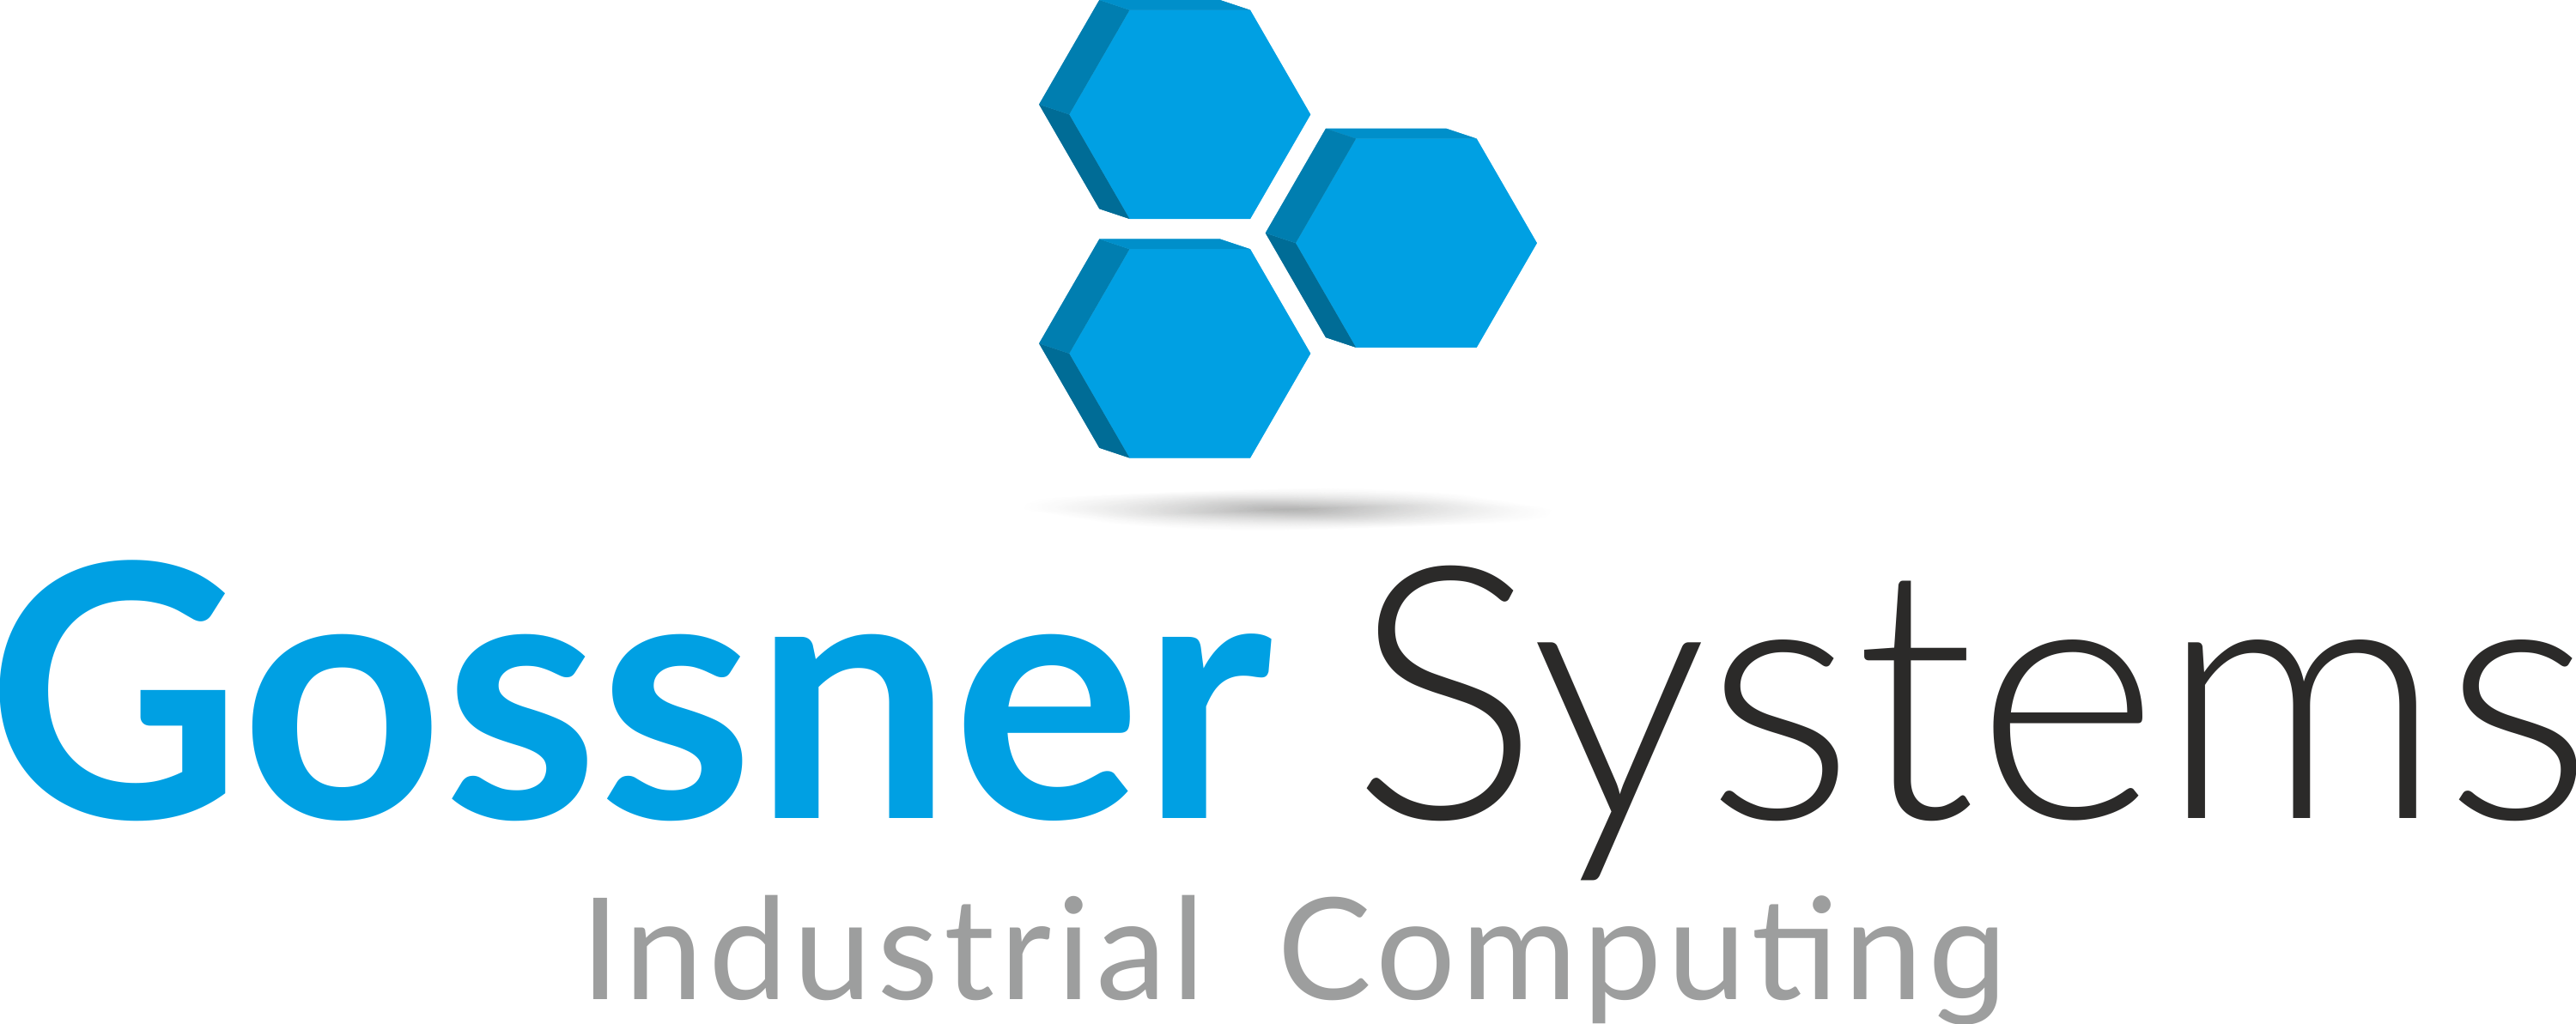 Gossner Systems - Industrial Computing